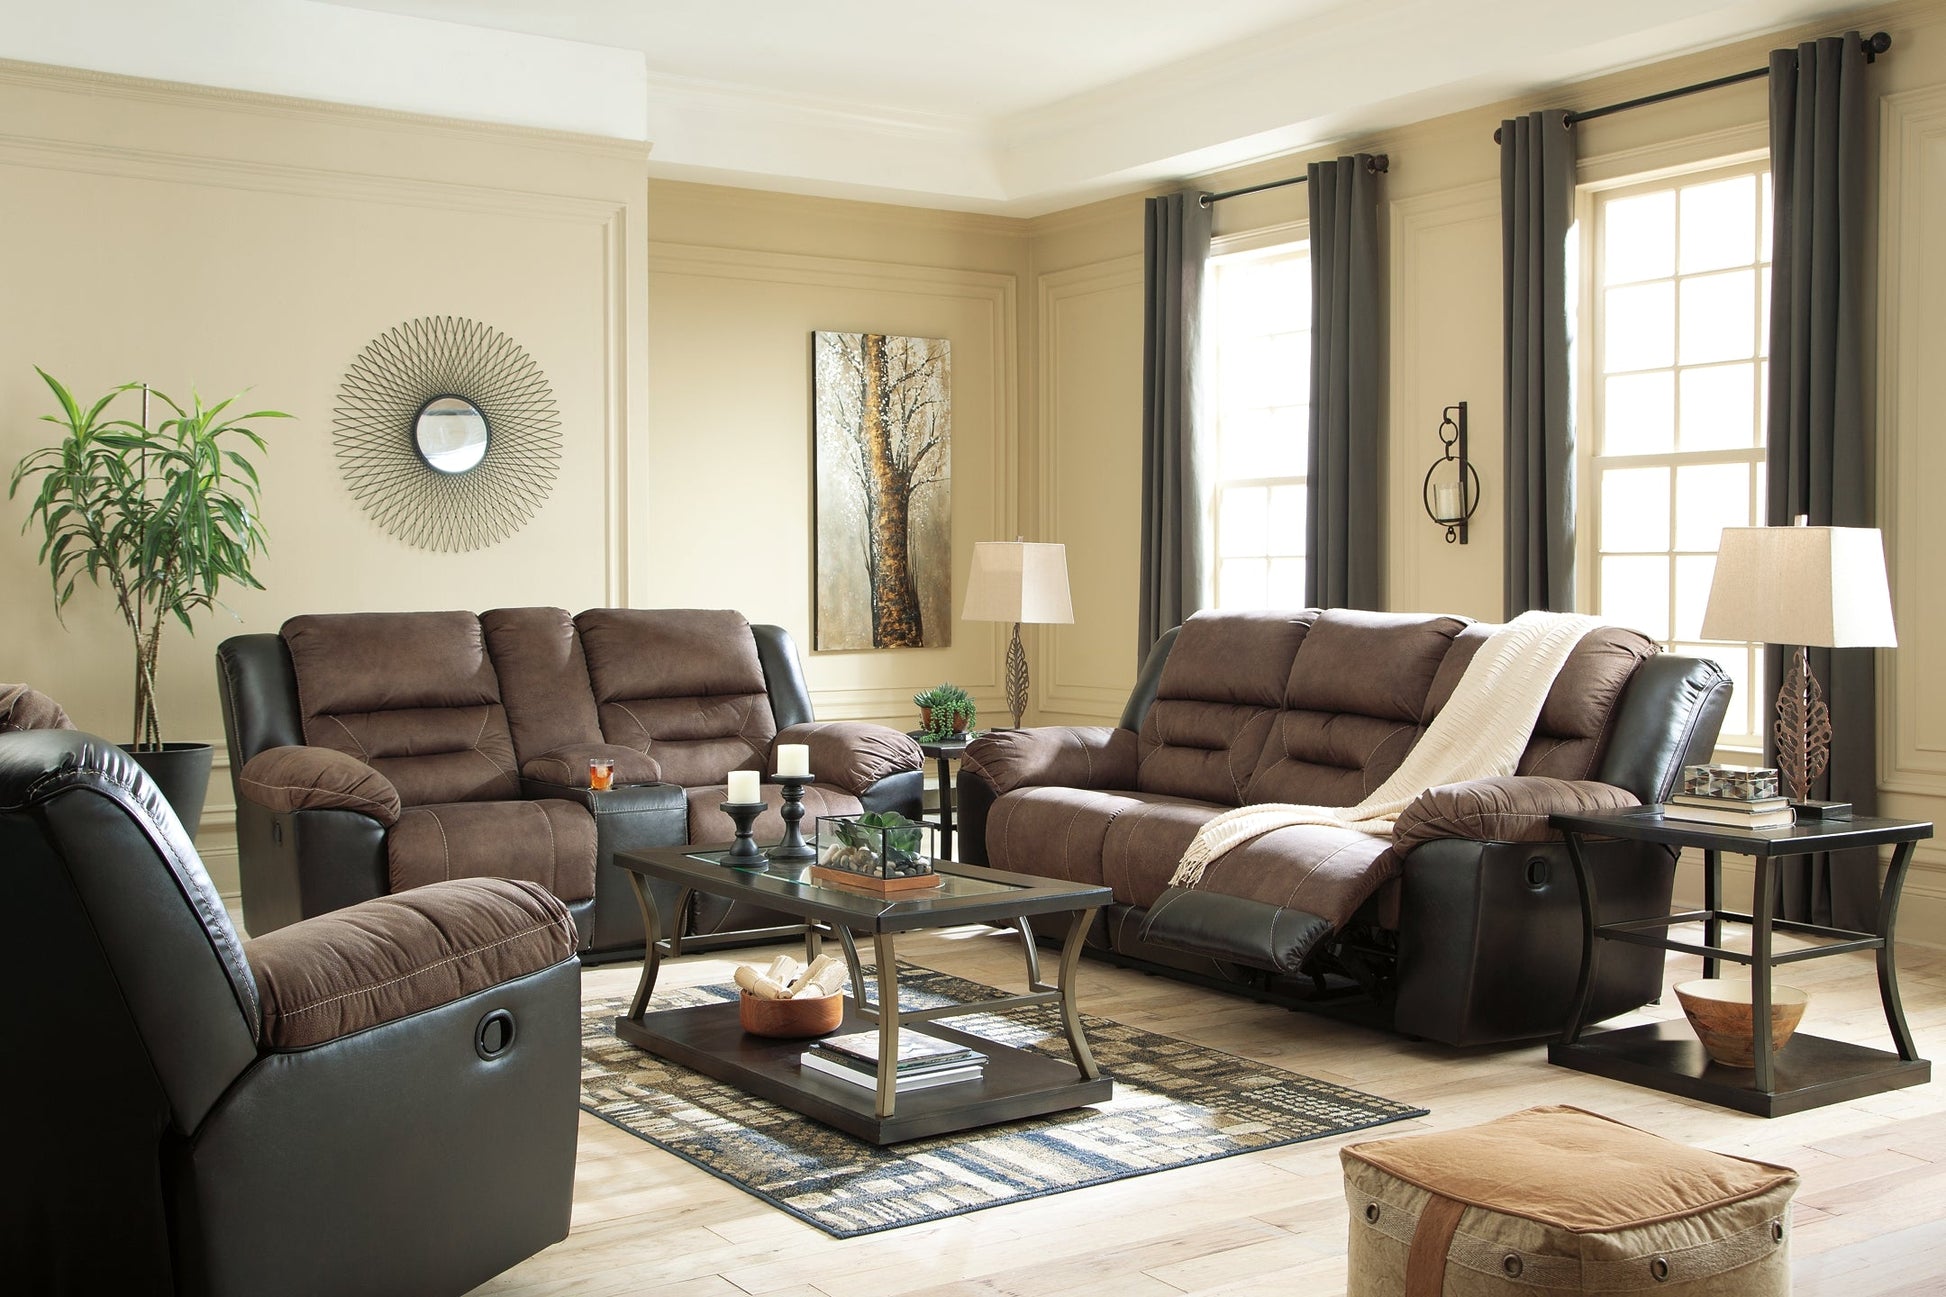 Earhart Sofa, Loveseat and Recliner at Walker Mattress and Furniture Locations in Cedar Park and Belton TX.